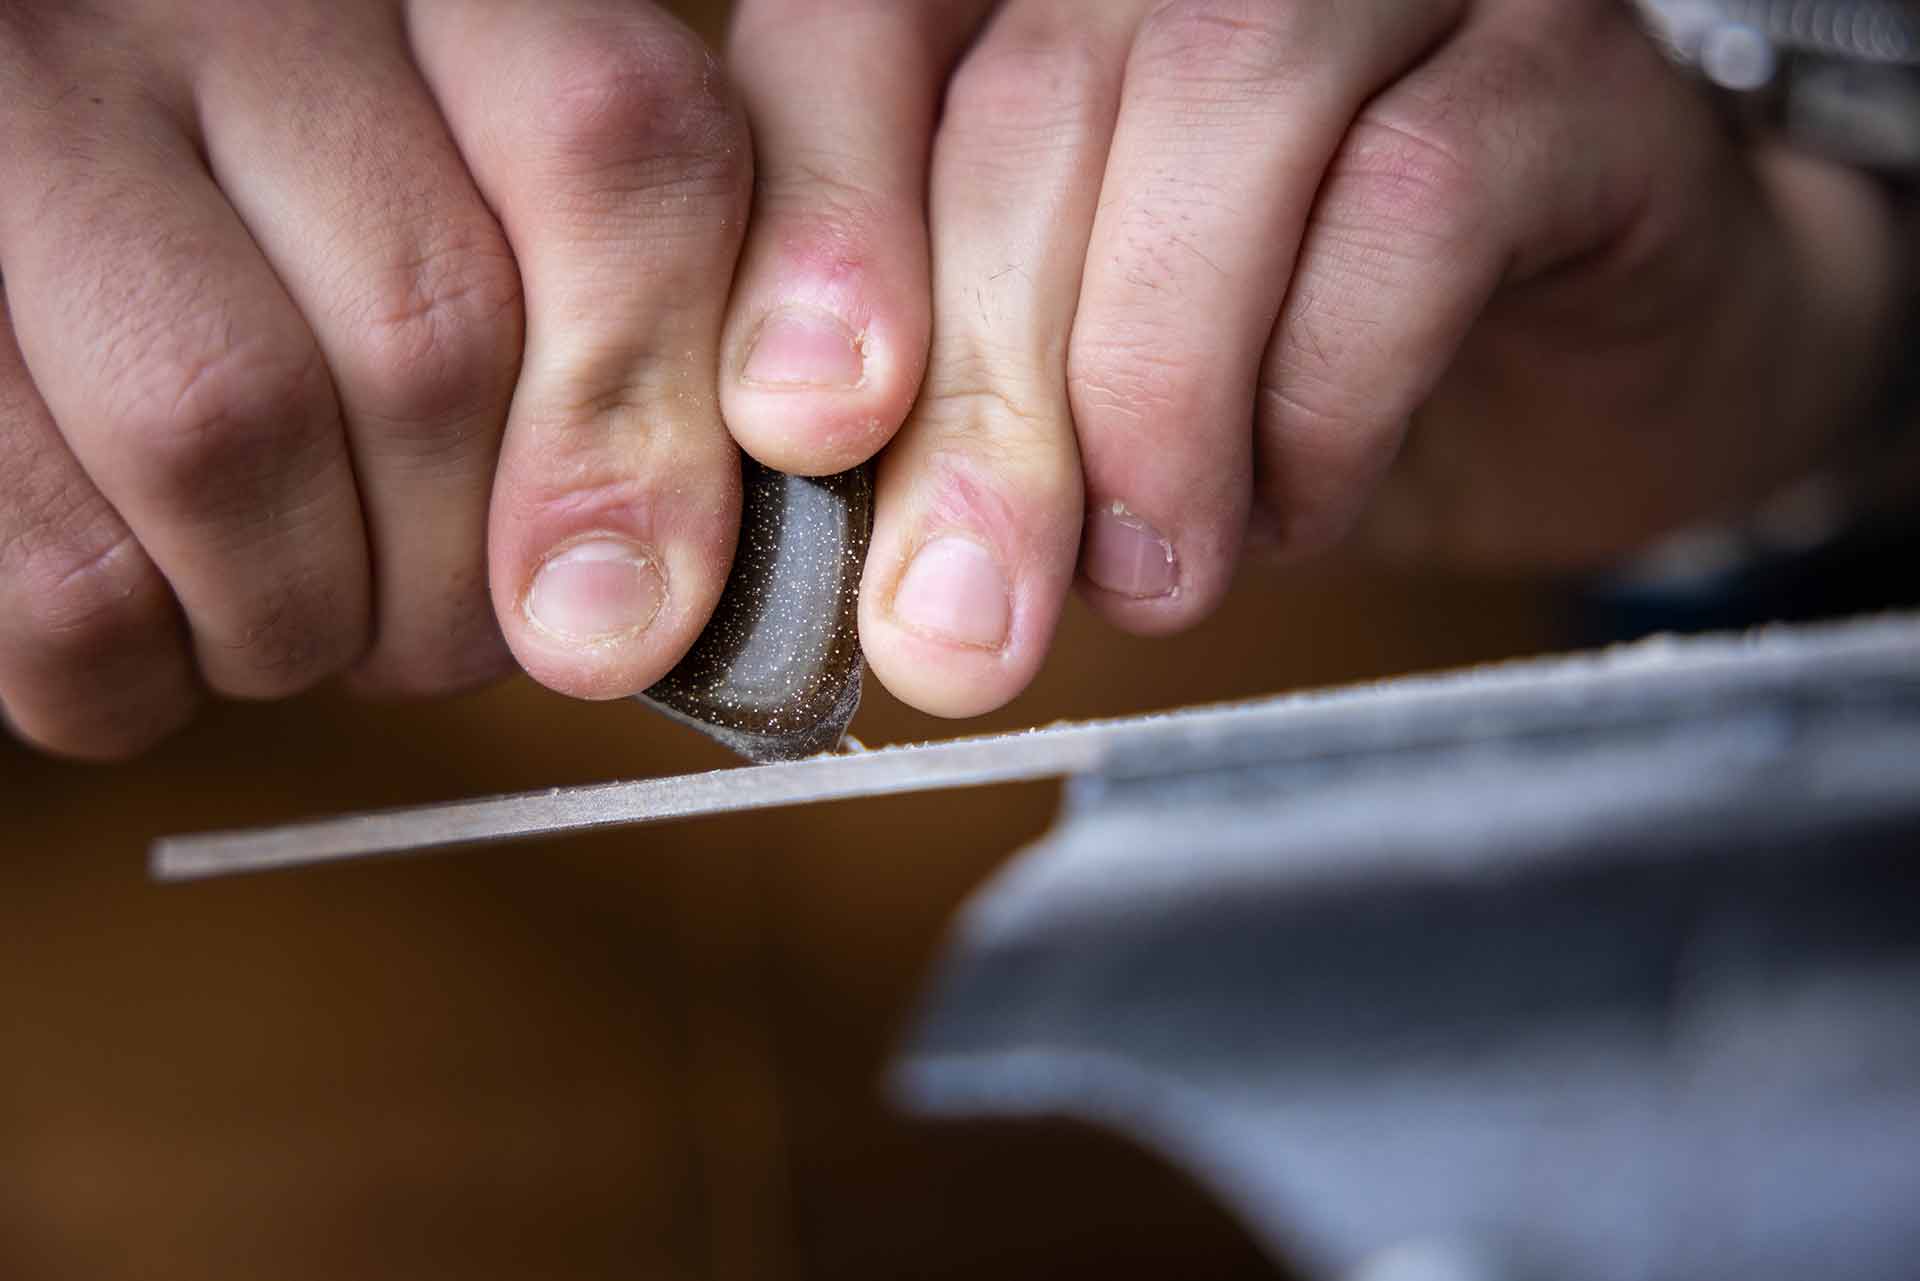 A close up of two hands gripping a guitar pick, sanding it down